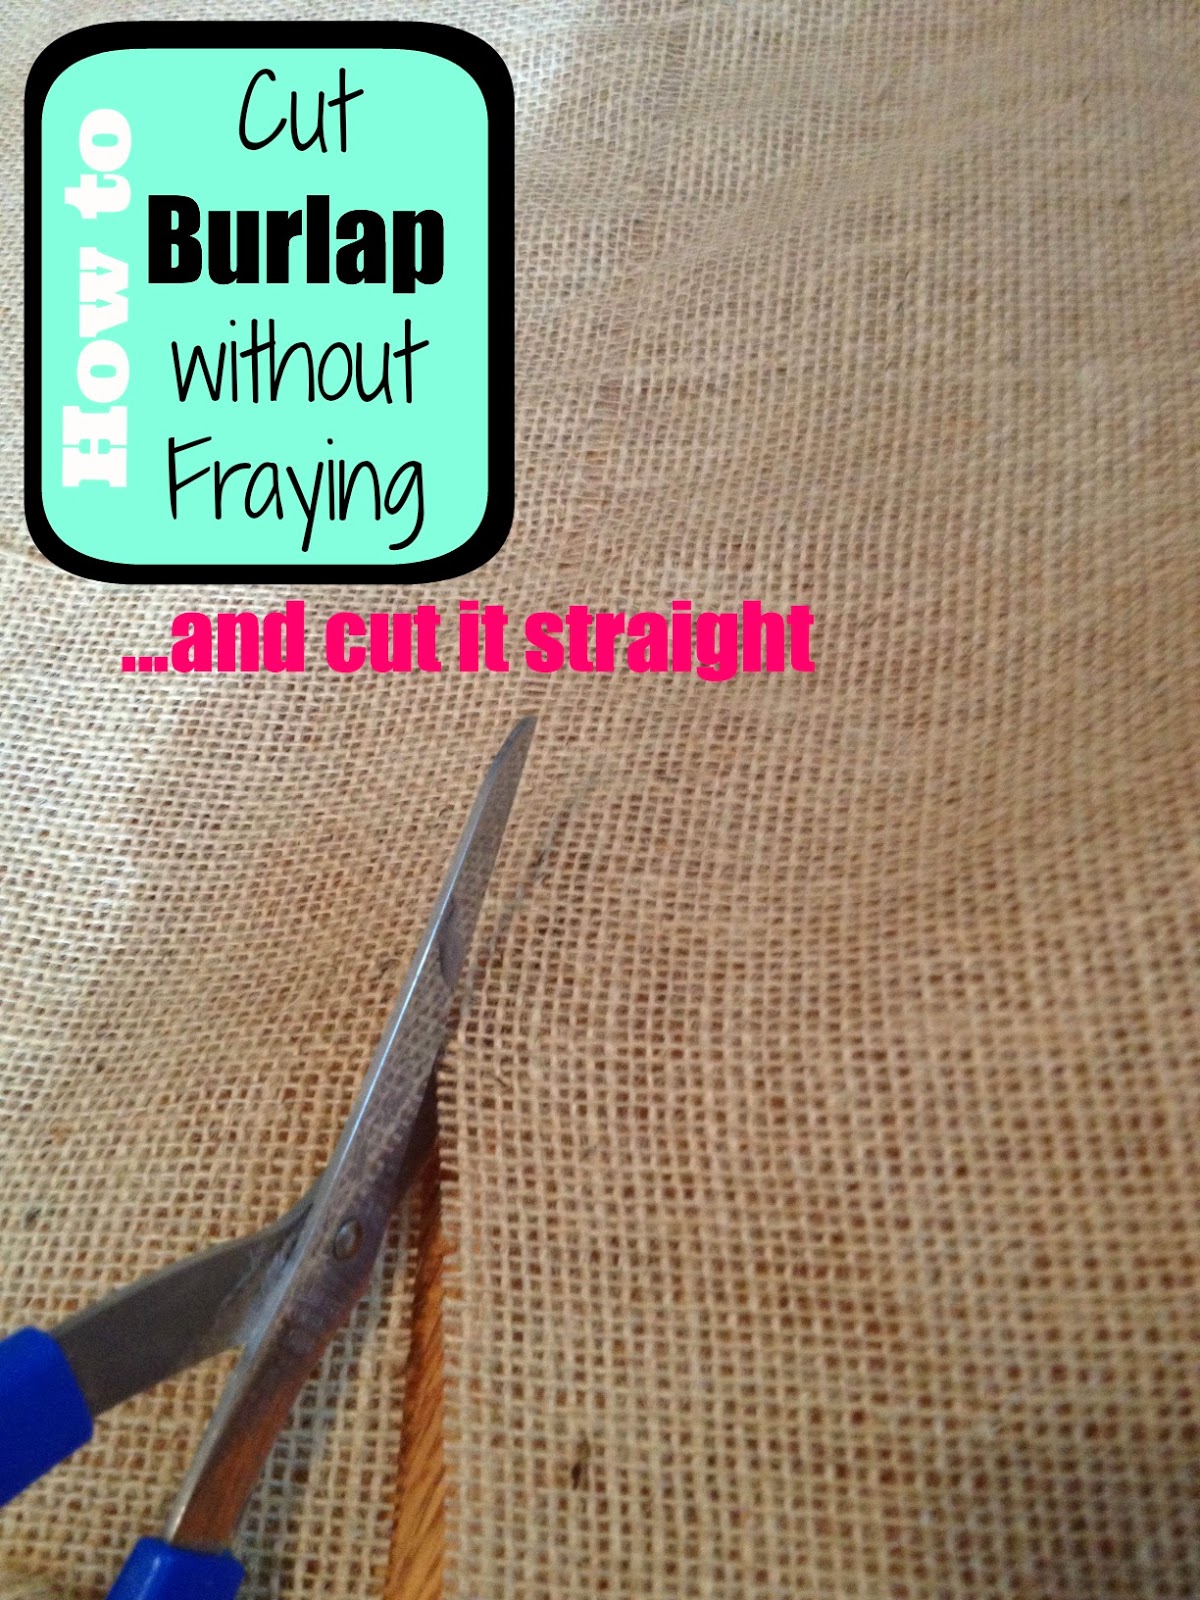 http://www.twoityourself.com/2013/11/how-to-cut-burlap-without-fraying-and.html